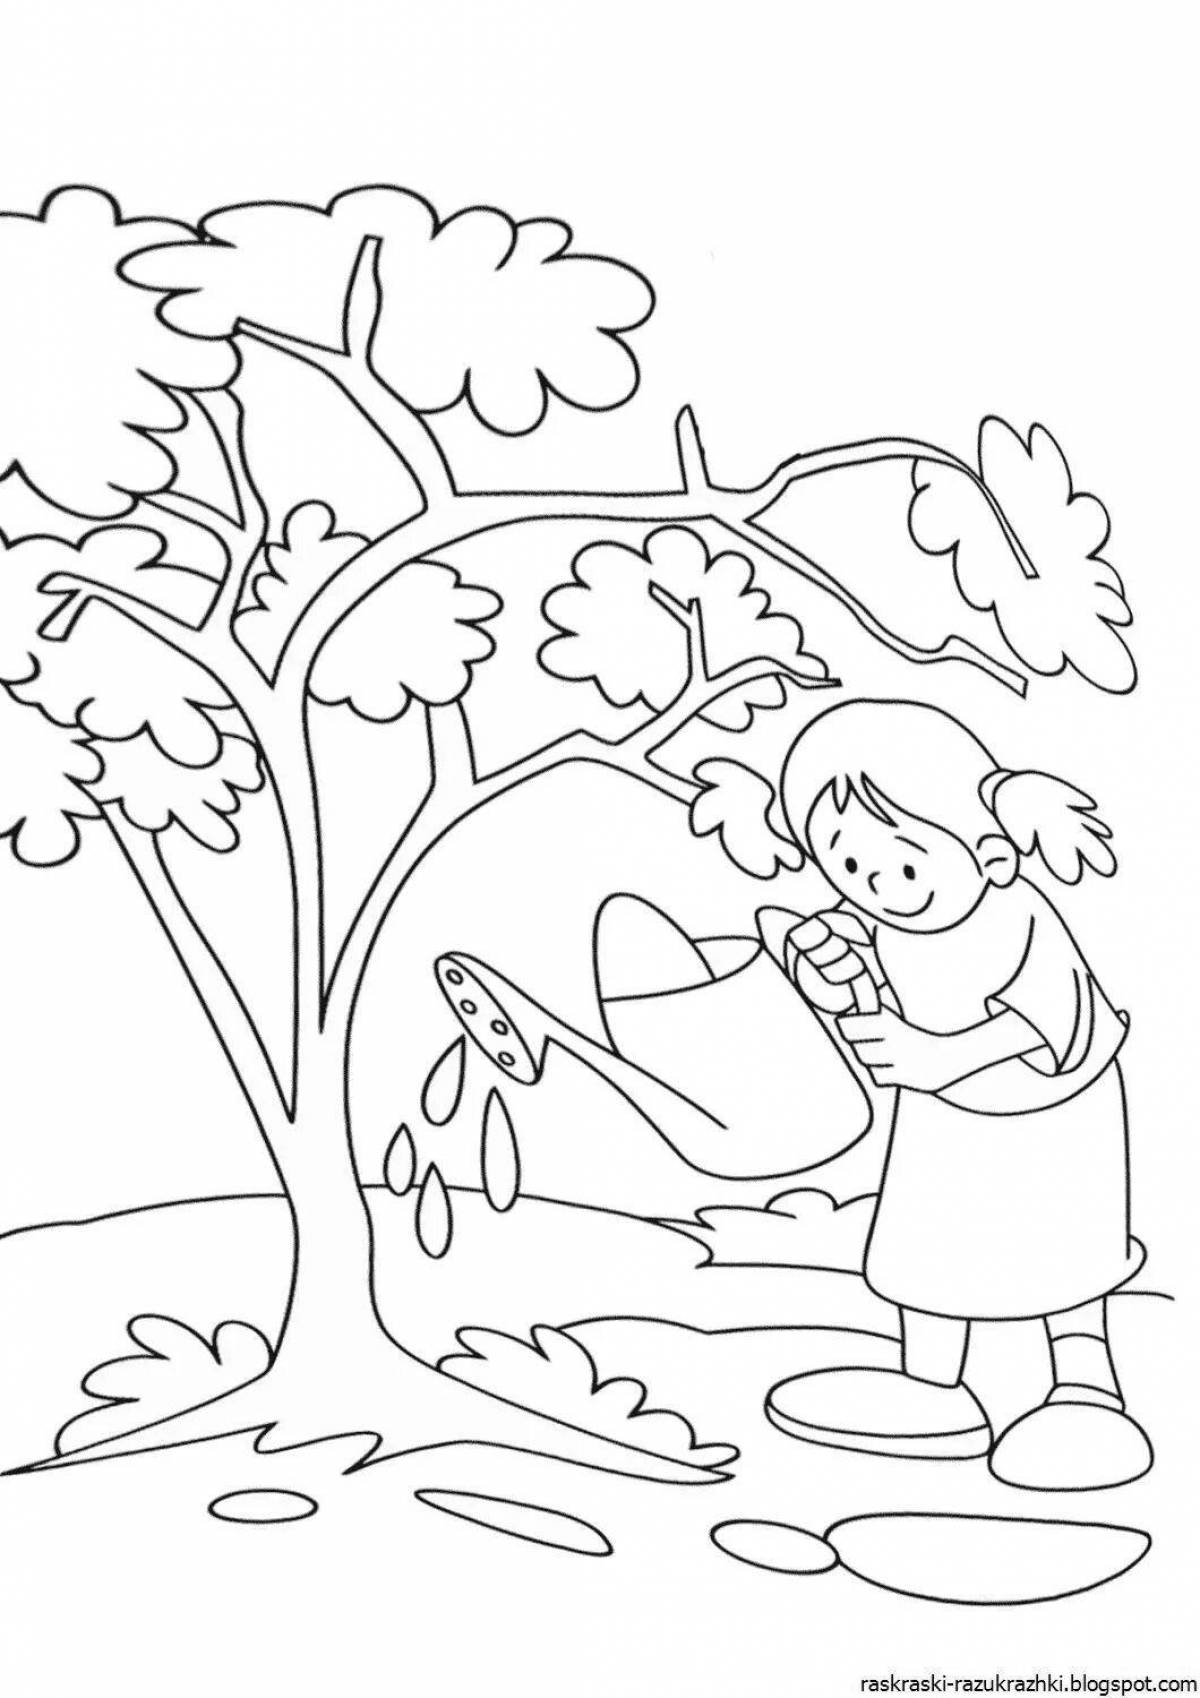 Coloring page fascinating caring for nature